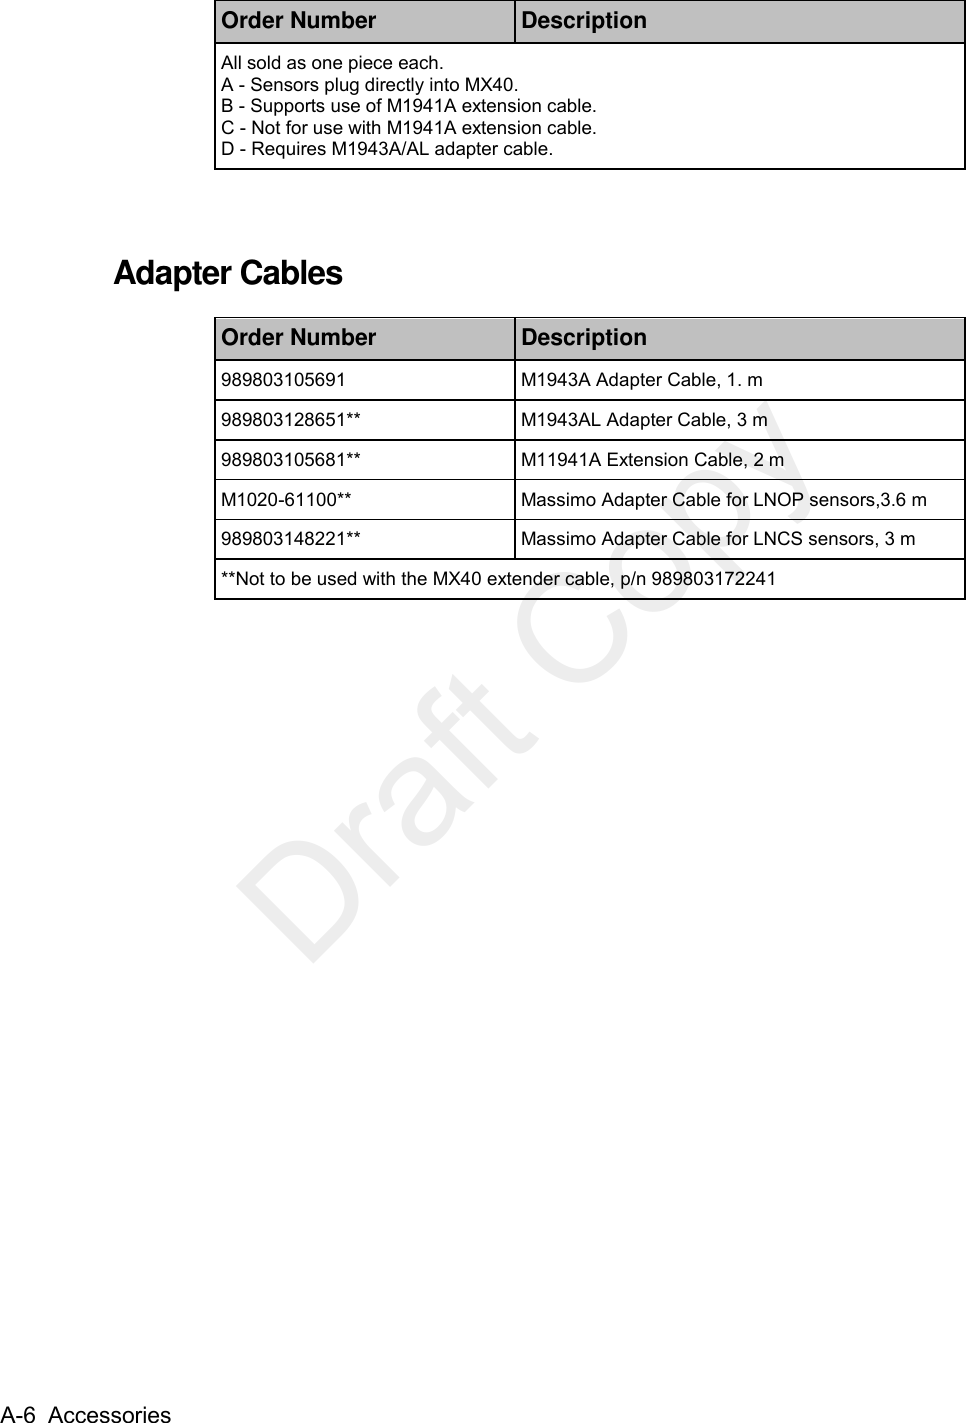  A-6  Accessories Order Number Description All sold as one piece each.  A - Sensors plug directly into MX40. B - Supports use of M1941A extension cable. C - Not for use with M1941A extension cable. D - Requires M1943A/AL adapter cable.   Adapter Cables Order Number Description 989803105691 M1943A Adapter Cable, 1. m 989803128651** M1943AL Adapter Cable, 3 m 989803105681** M11941A Extension Cable, 2 m M1020-61100** Massimo Adapter Cable for LNOP sensors,3.6 m 989803148221** Massimo Adapter Cable for LNCS sensors, 3 m **Not to be used with the MX40 extender cable, p/n 989803172241   Draft Copy